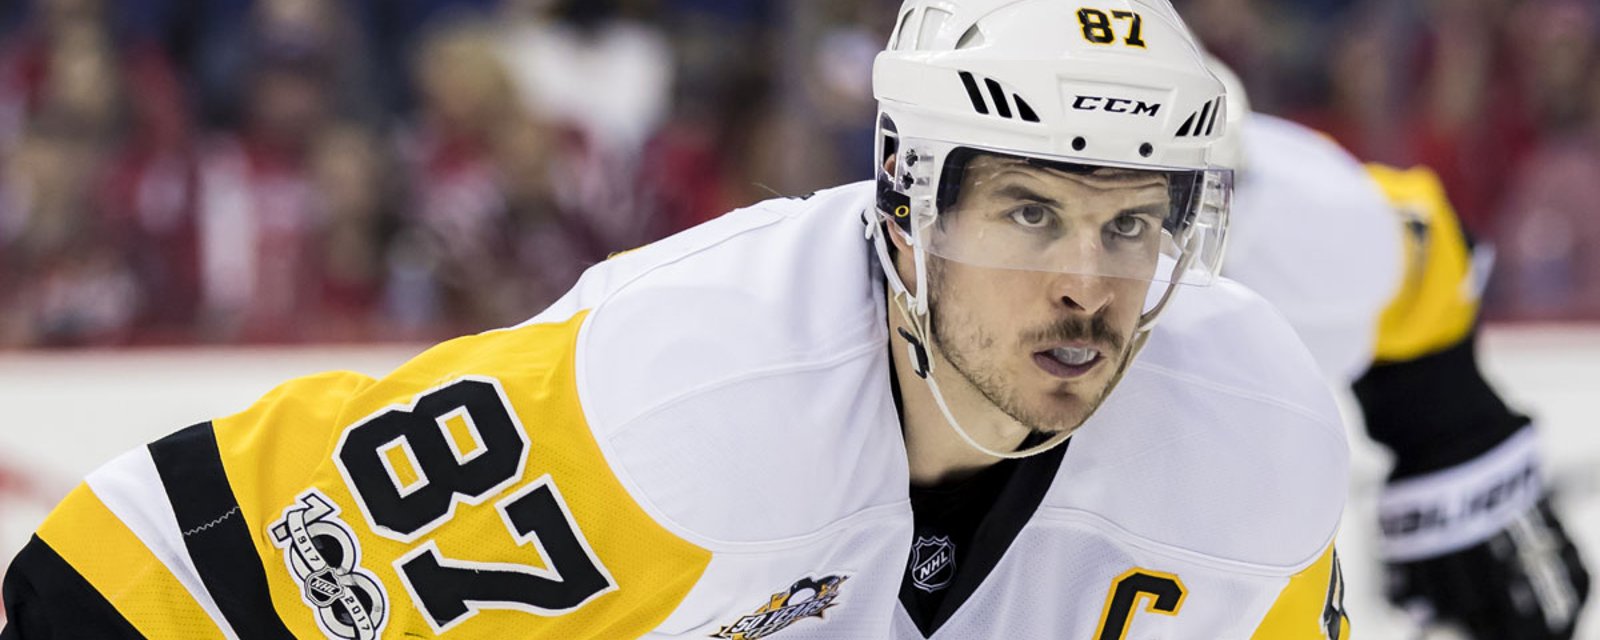 Crosby takes a stand on game's controversial issue 